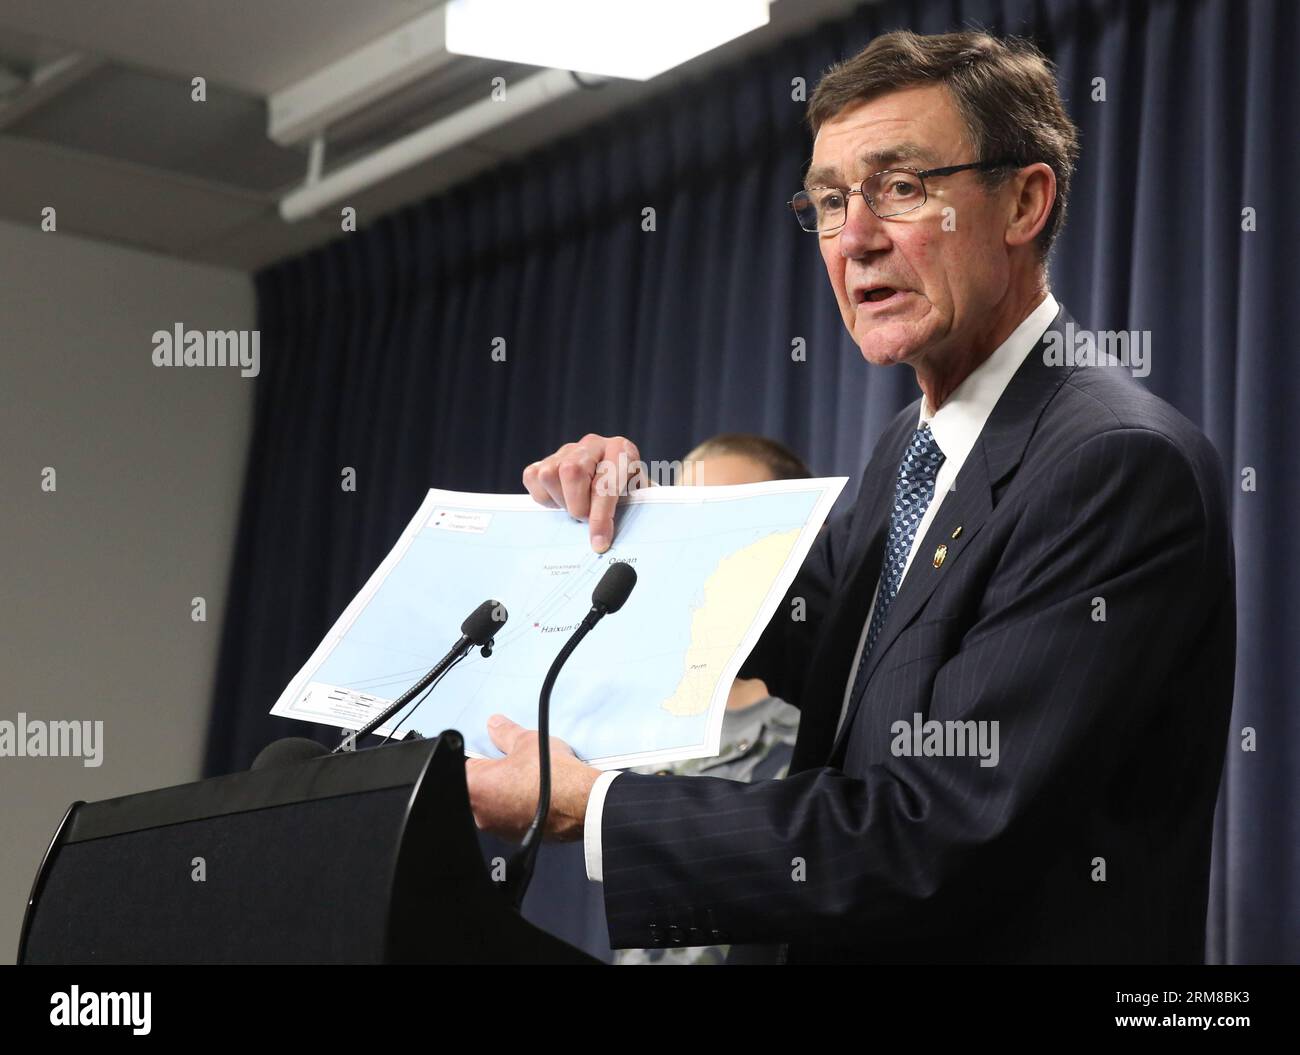 (140407) -- PERTH, April 7, 2014 (Xinhua) -- Angus Houston, head of the Joint Agency Coordination Center (JACC) for the searching of the missing Malaysian flight MH370 speaks during a news conference in Perth, Australia, on April 7, 2014. An Australian vessel searching the missing Malaysian flight 370 has detected electronic pulse signals probably related to the black box in the Indian Ocean during the past 24 hours. However, the unsuccessful effort to reacquire the signal later may suggest the battery may finish in a very short time, according to searching officials and U.S. Navy technicians. Stock Photo